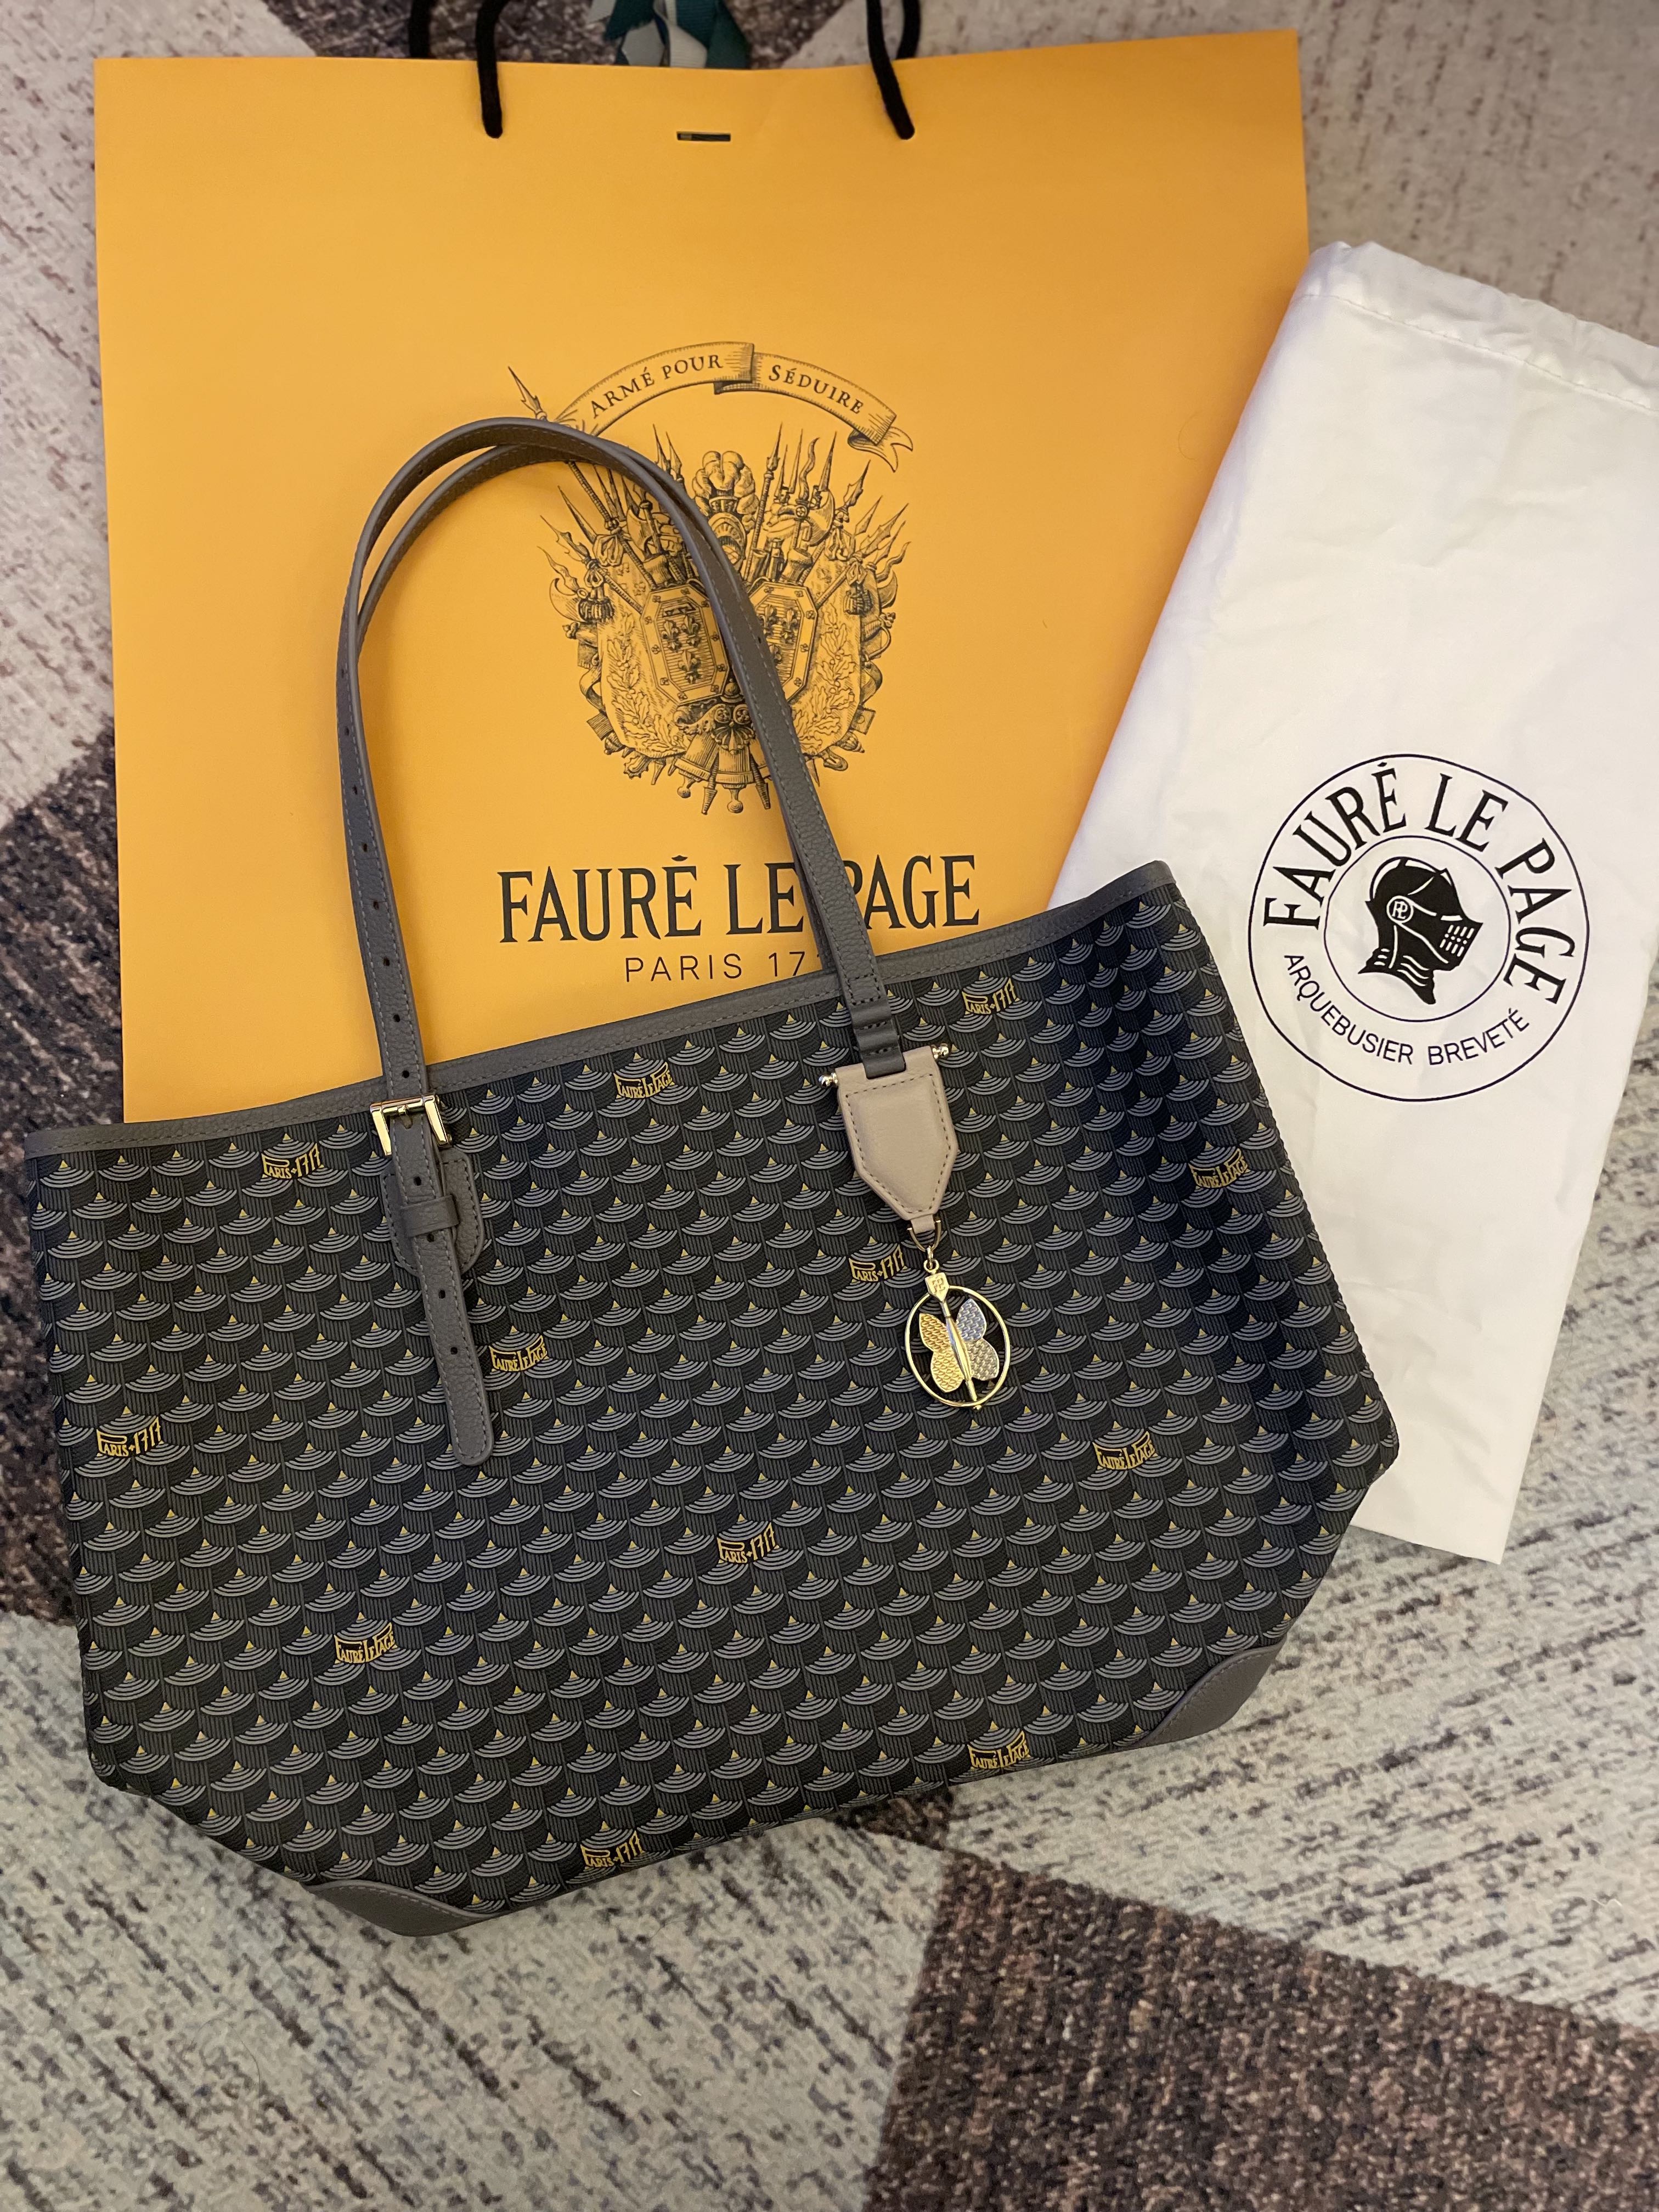 Sell Faure le Page Daily Battle 32 Tote Bag - Brown